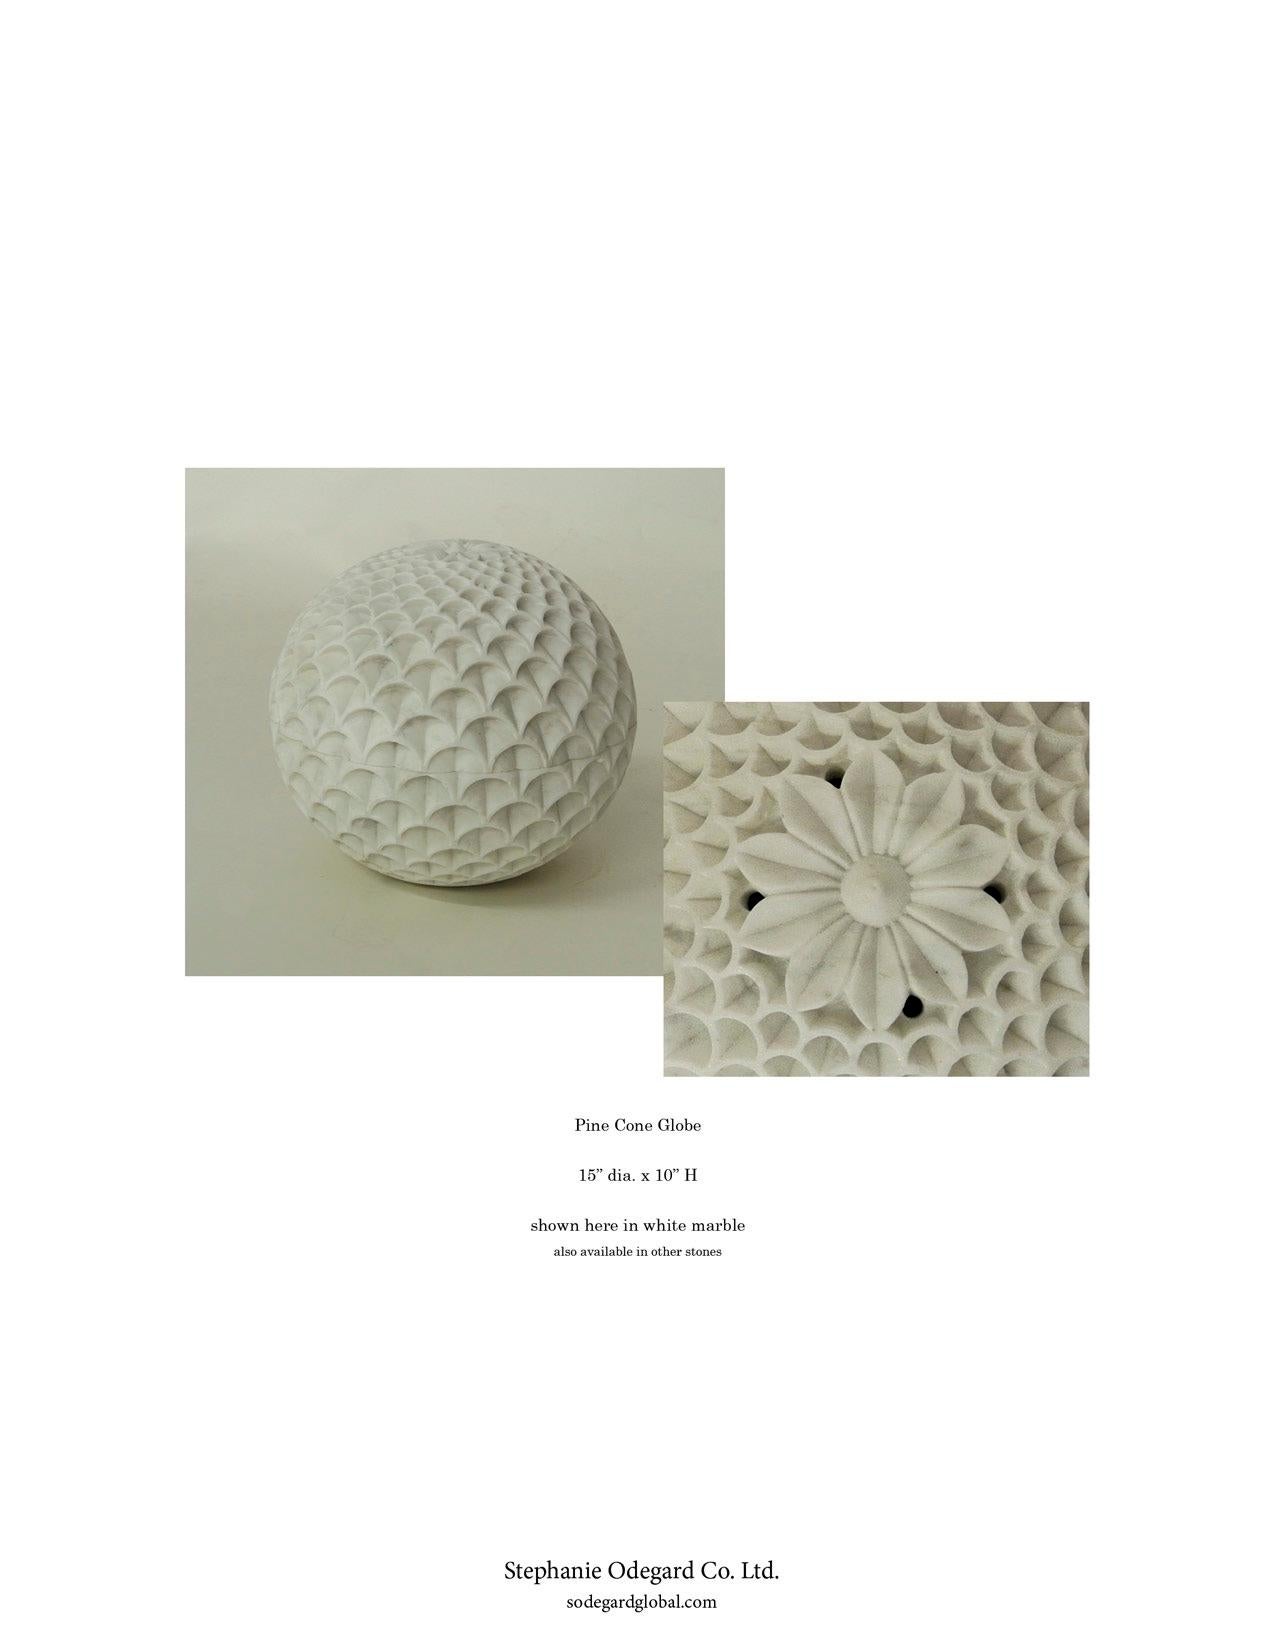 Indian Pinecone Globe in White Marble 18